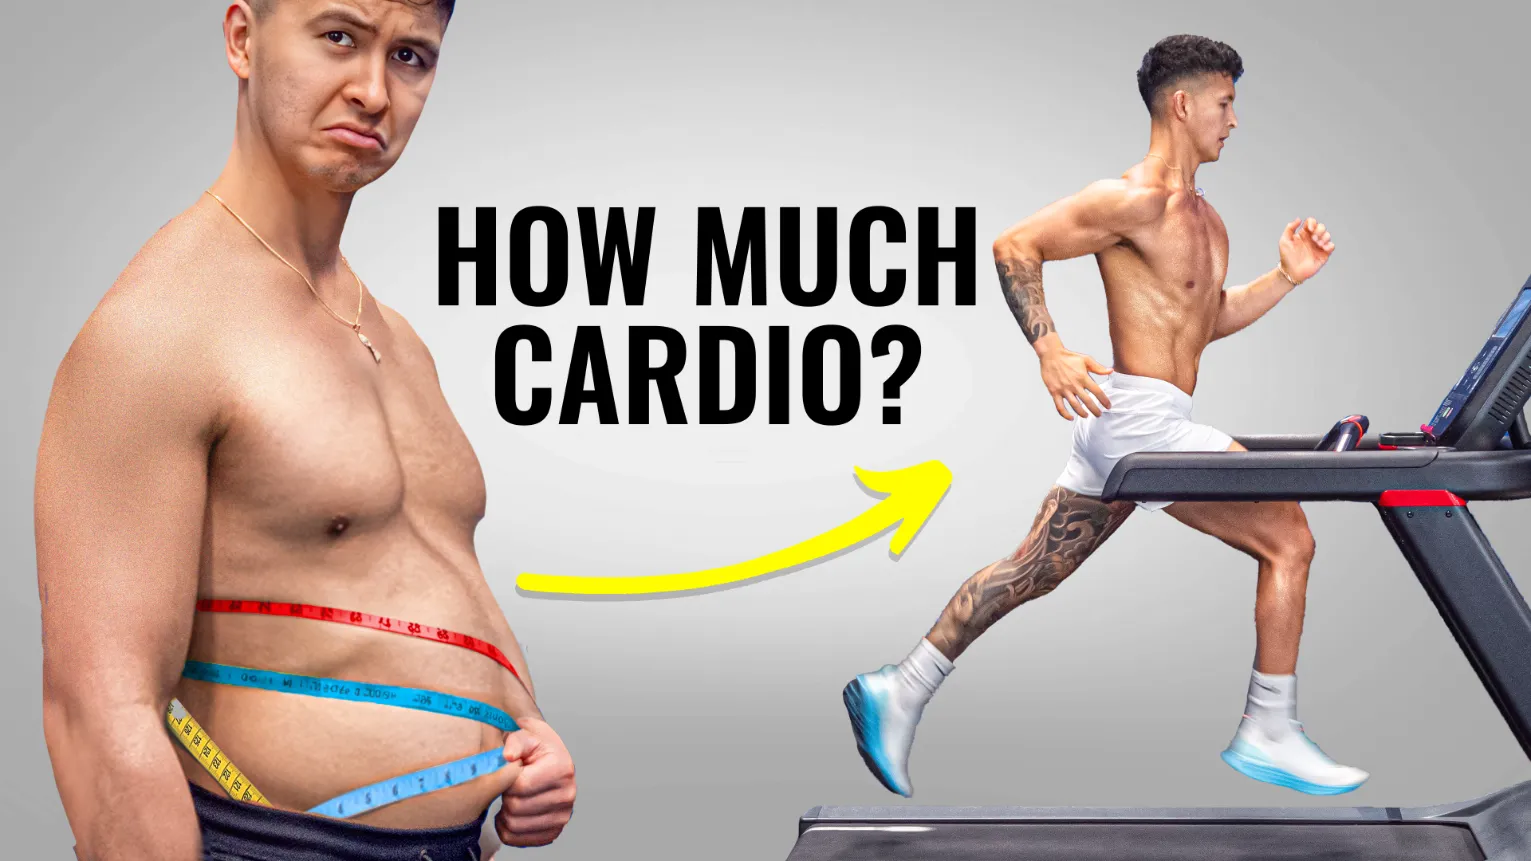 How much cardio to lose weight cover image